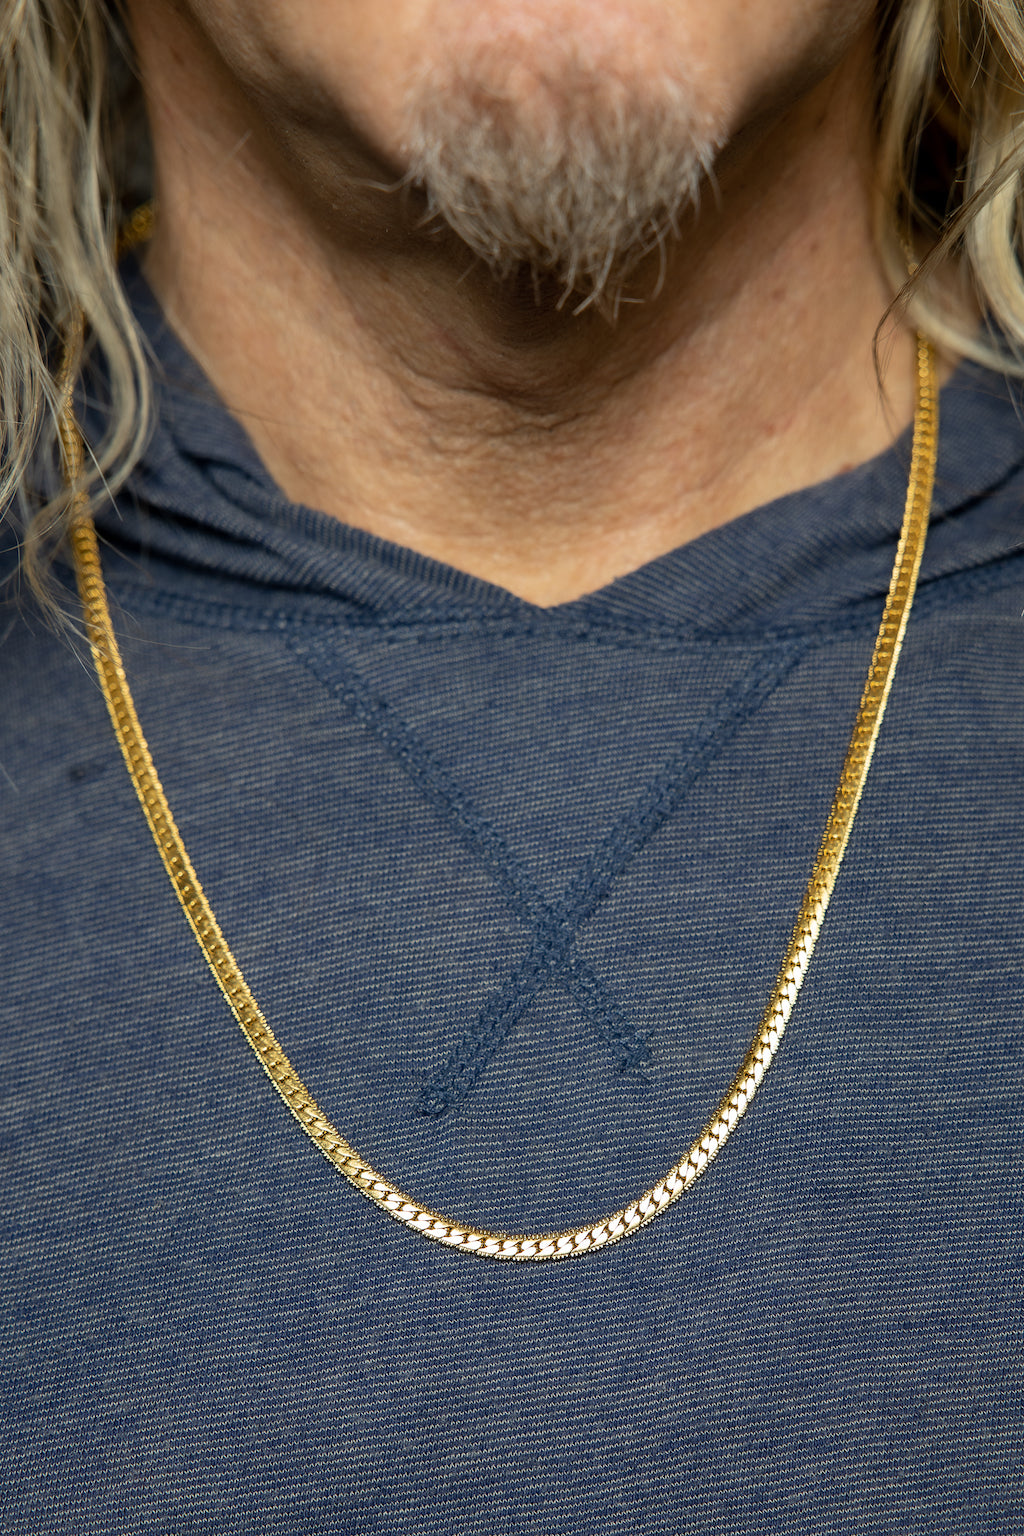 Bling Cartel Herringbone Mens Yellow 14k Gold Plated 4-14 MM Wide Chain 20  24 30 Inch Necklace (11 MM x 24 IN) | Amazon.com